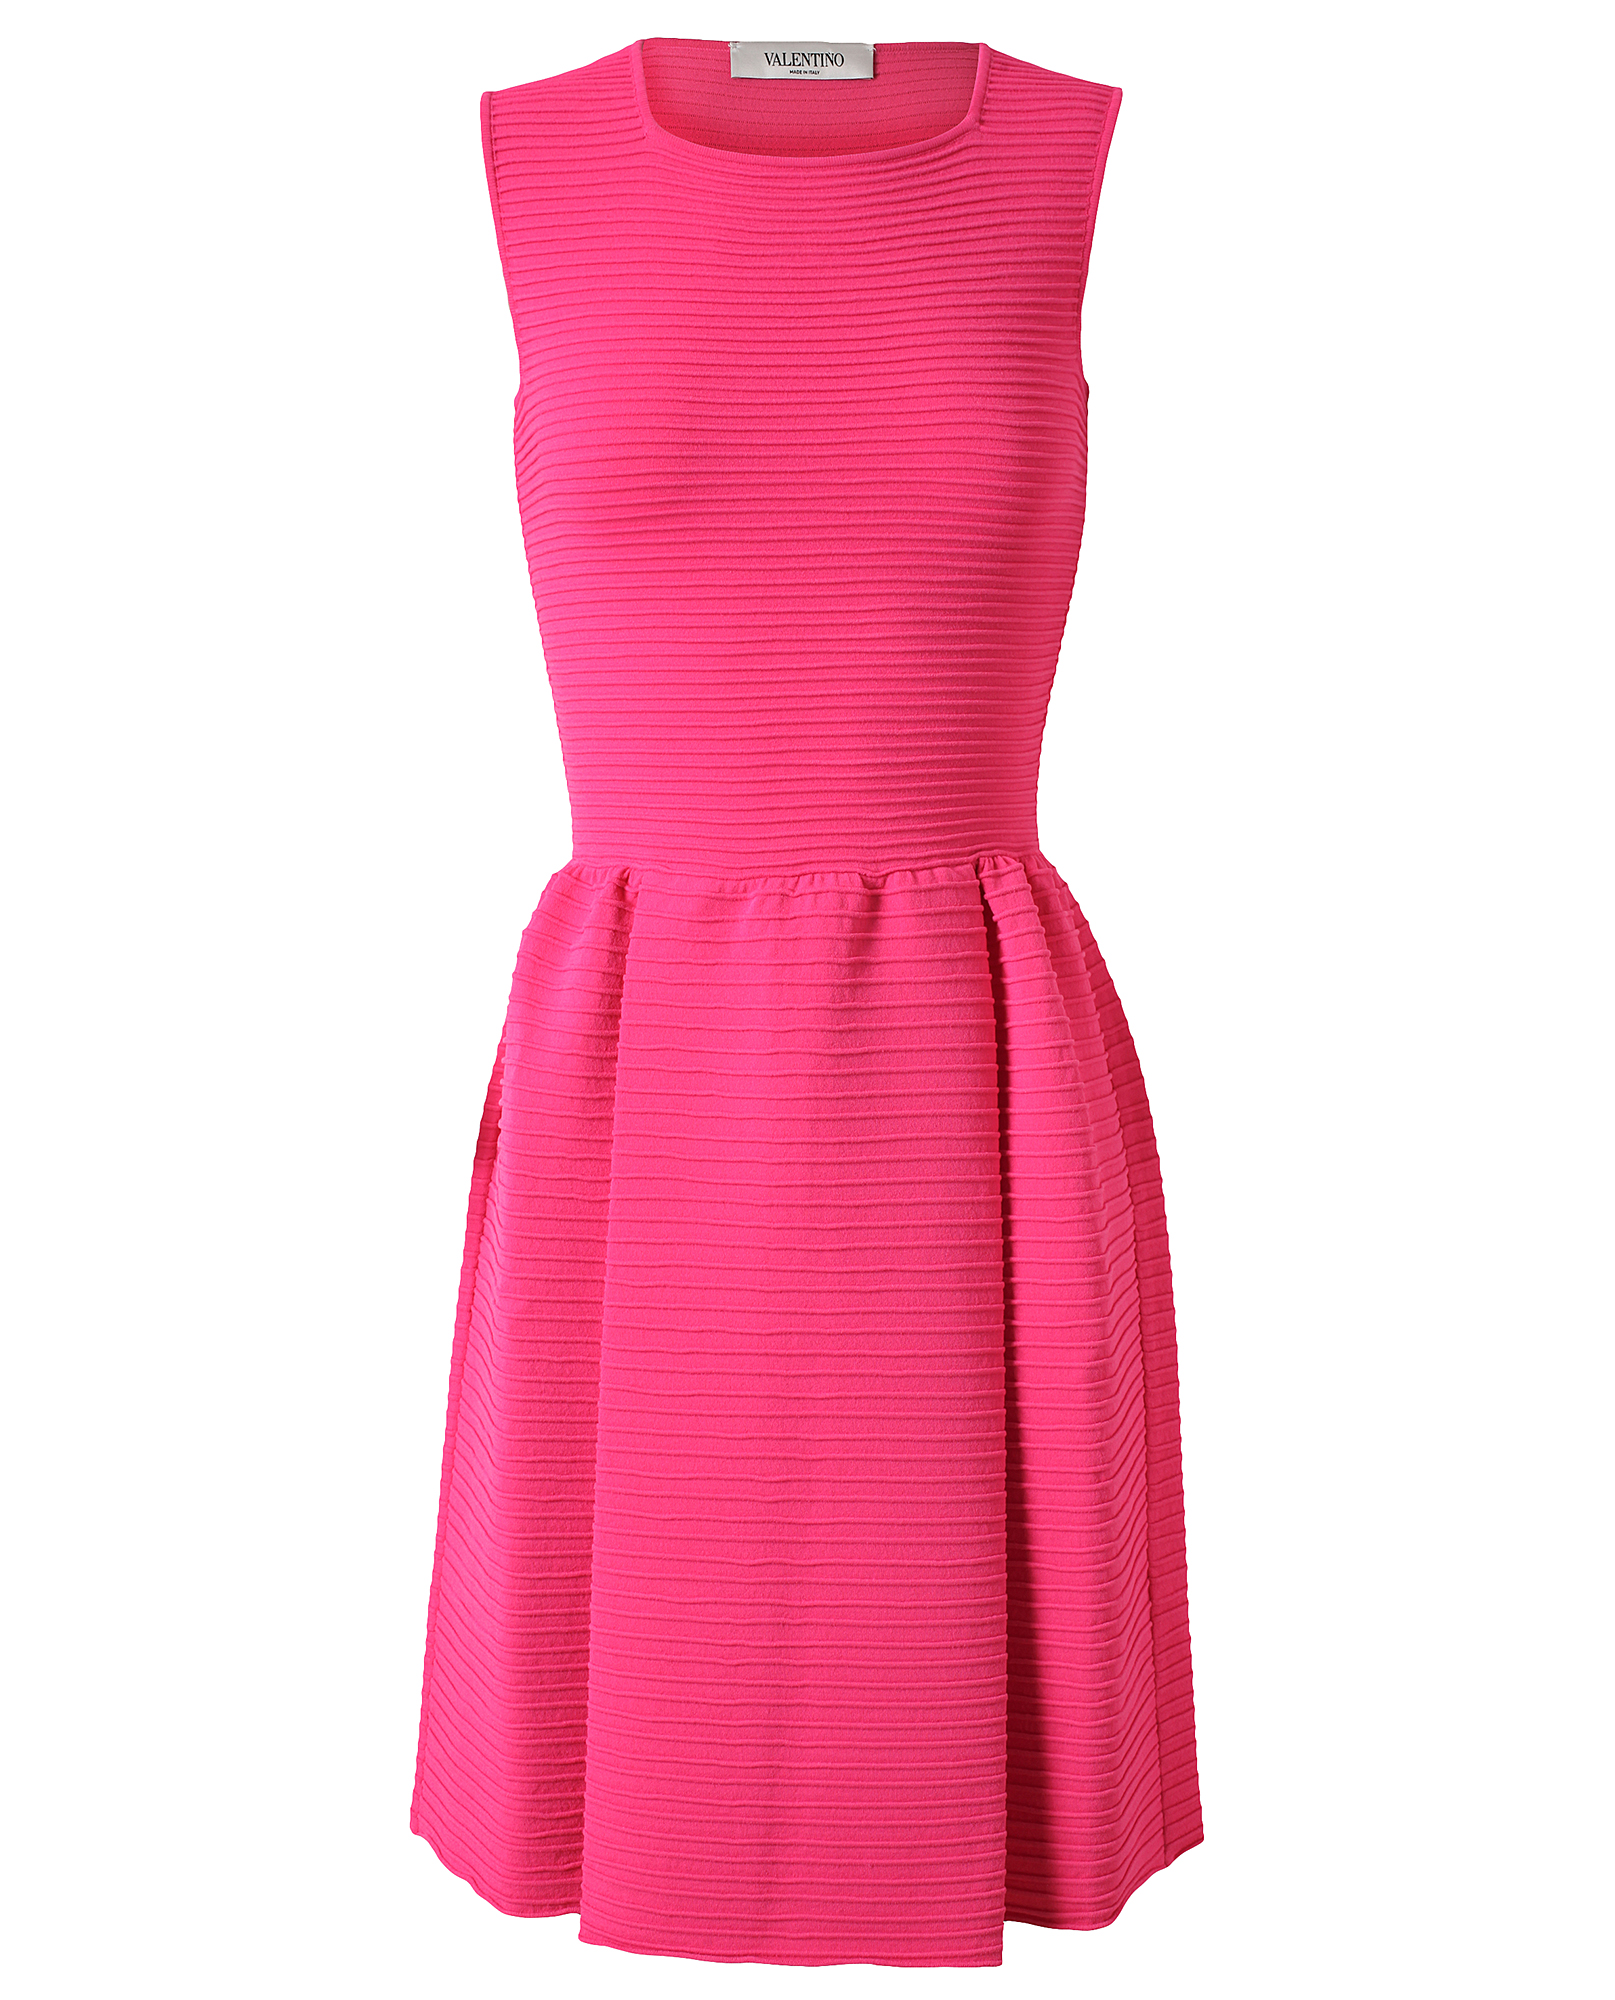 Valentino Ribbed Stretch Knit Dress in Pink | Lyst